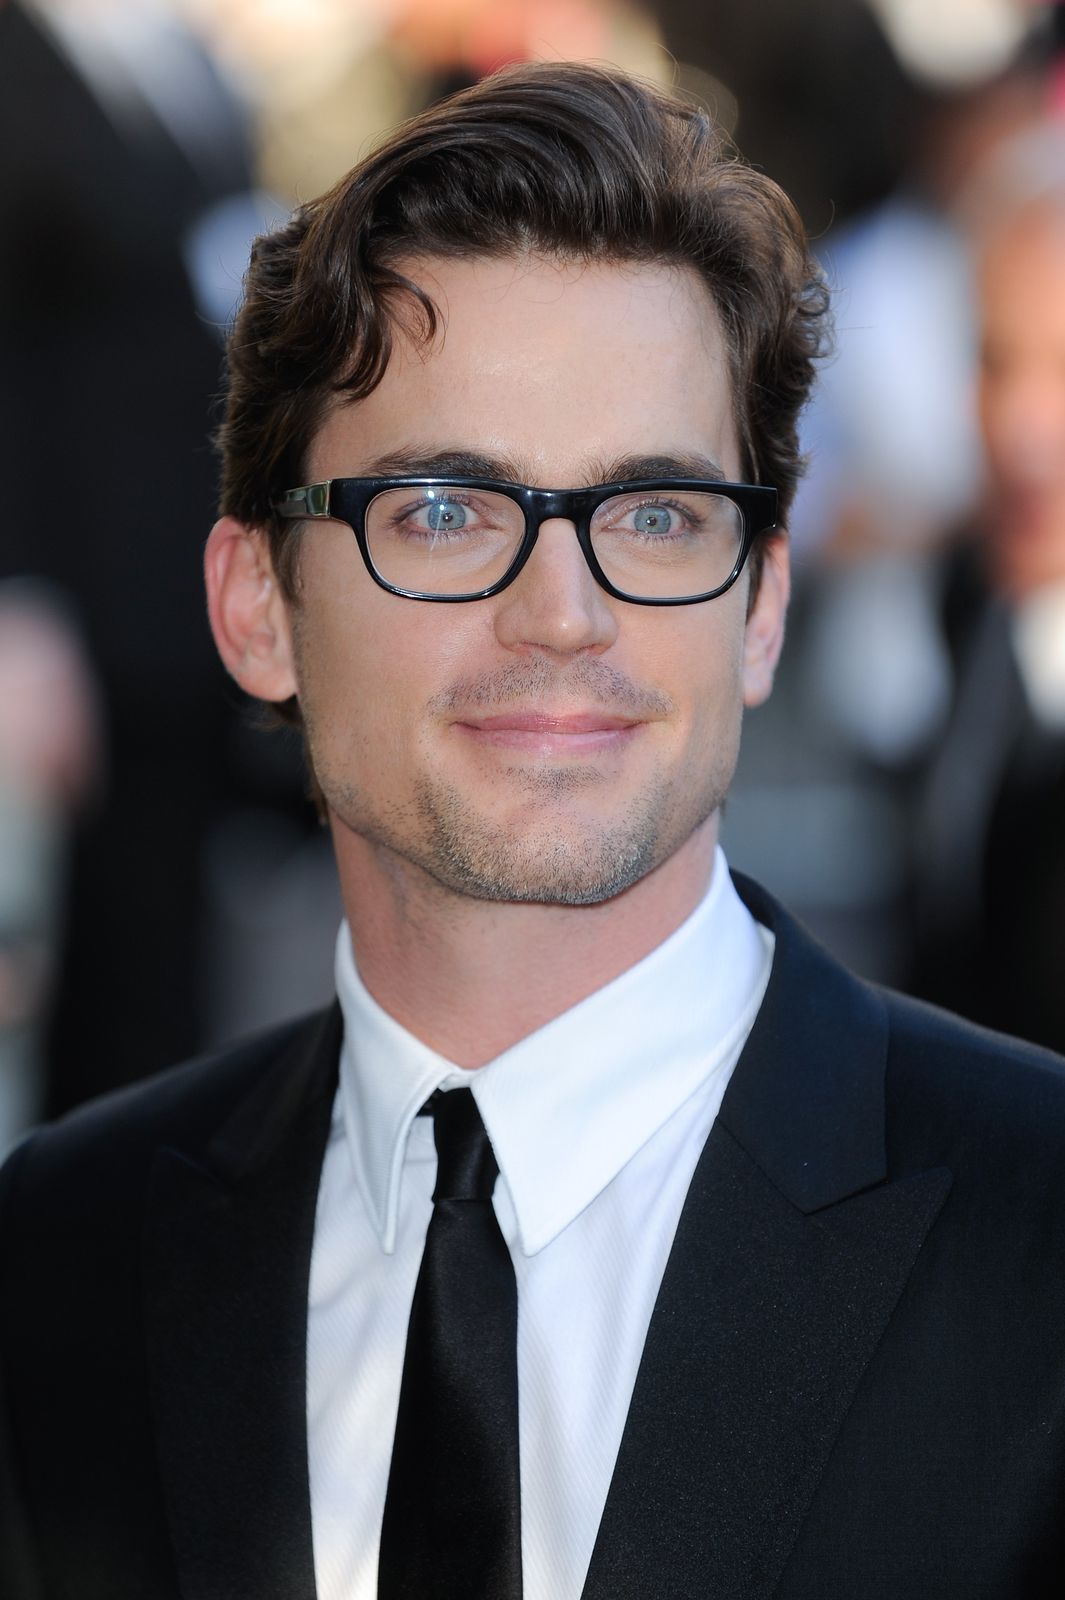 People Are Displeased About Matt Bomer Playing Transgender In 'Anything'